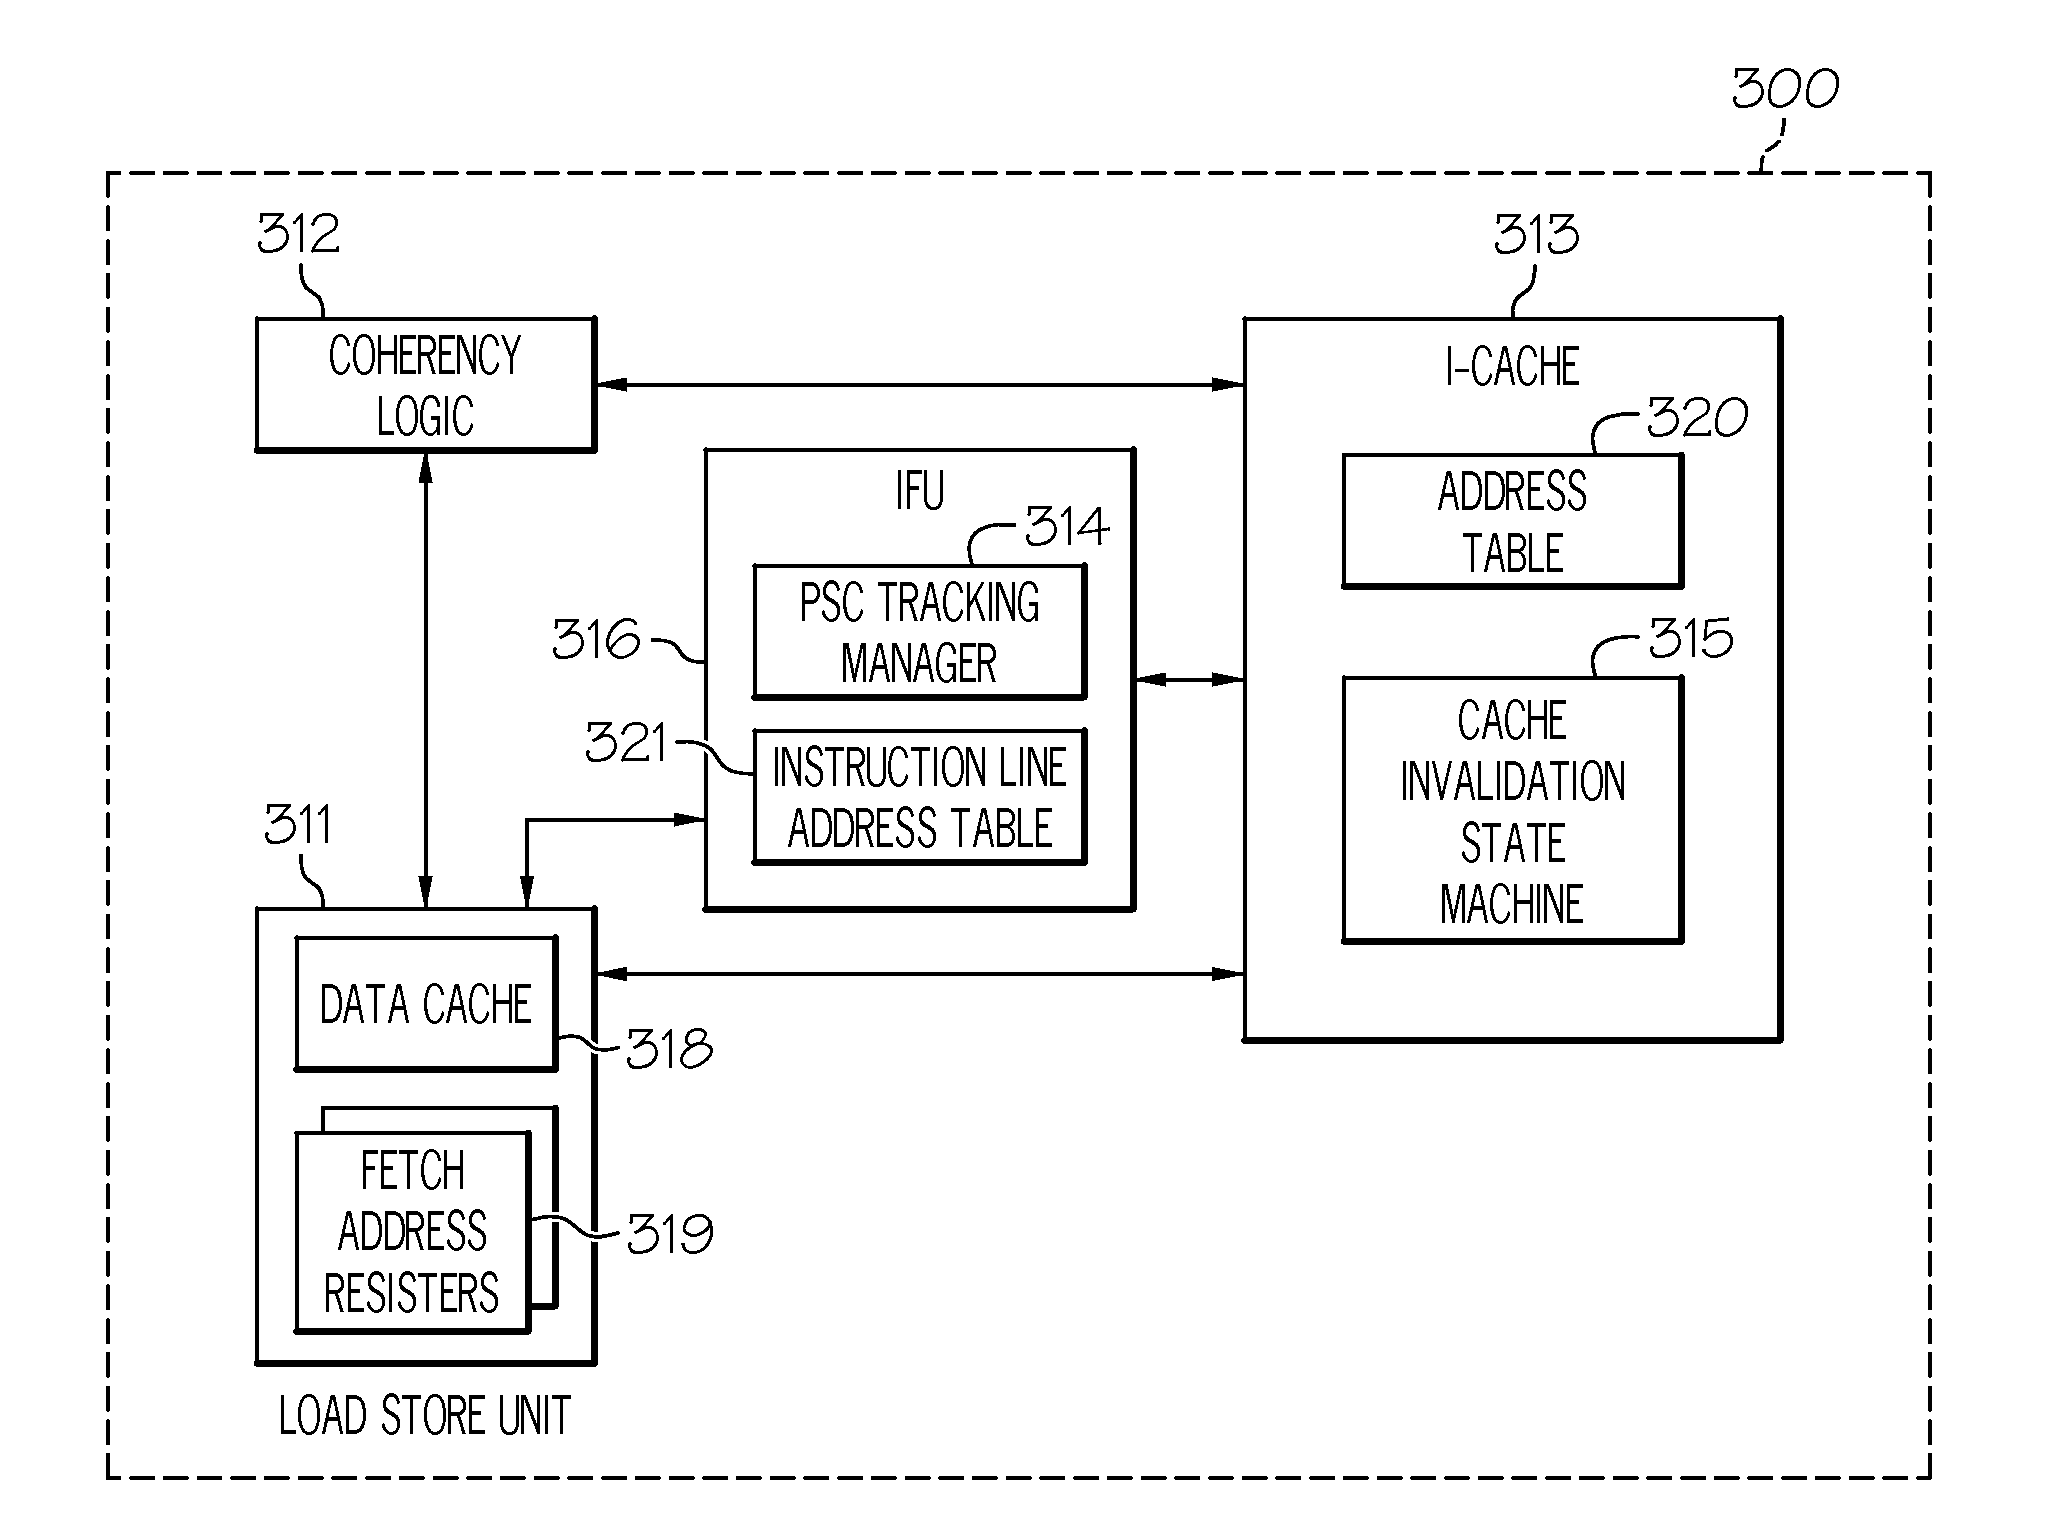 Managing cache coherency for self-modifying code in an out-of-order execution system